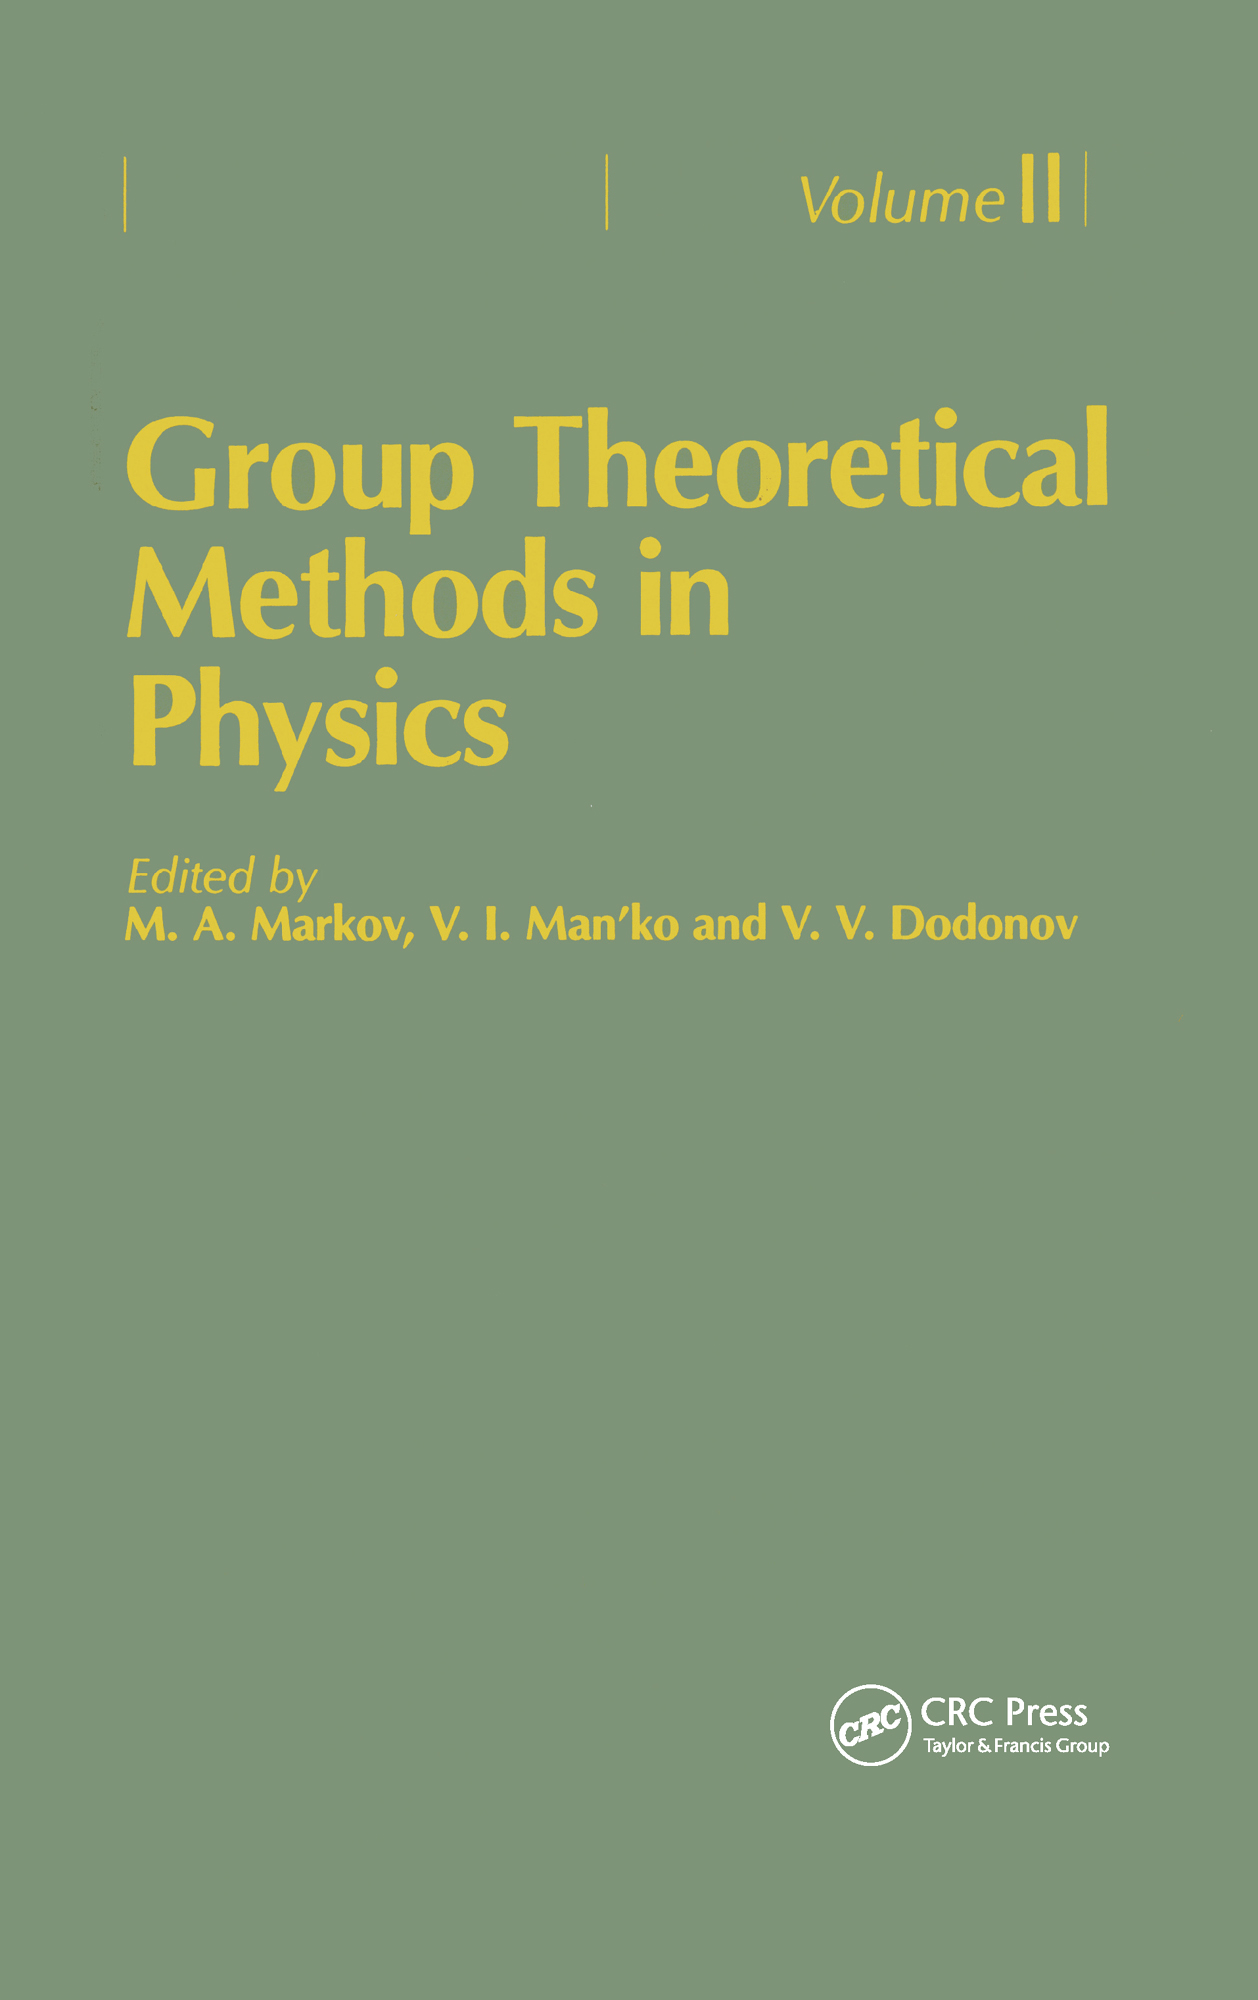 Group Theoretical Methods in Physics. Volume II